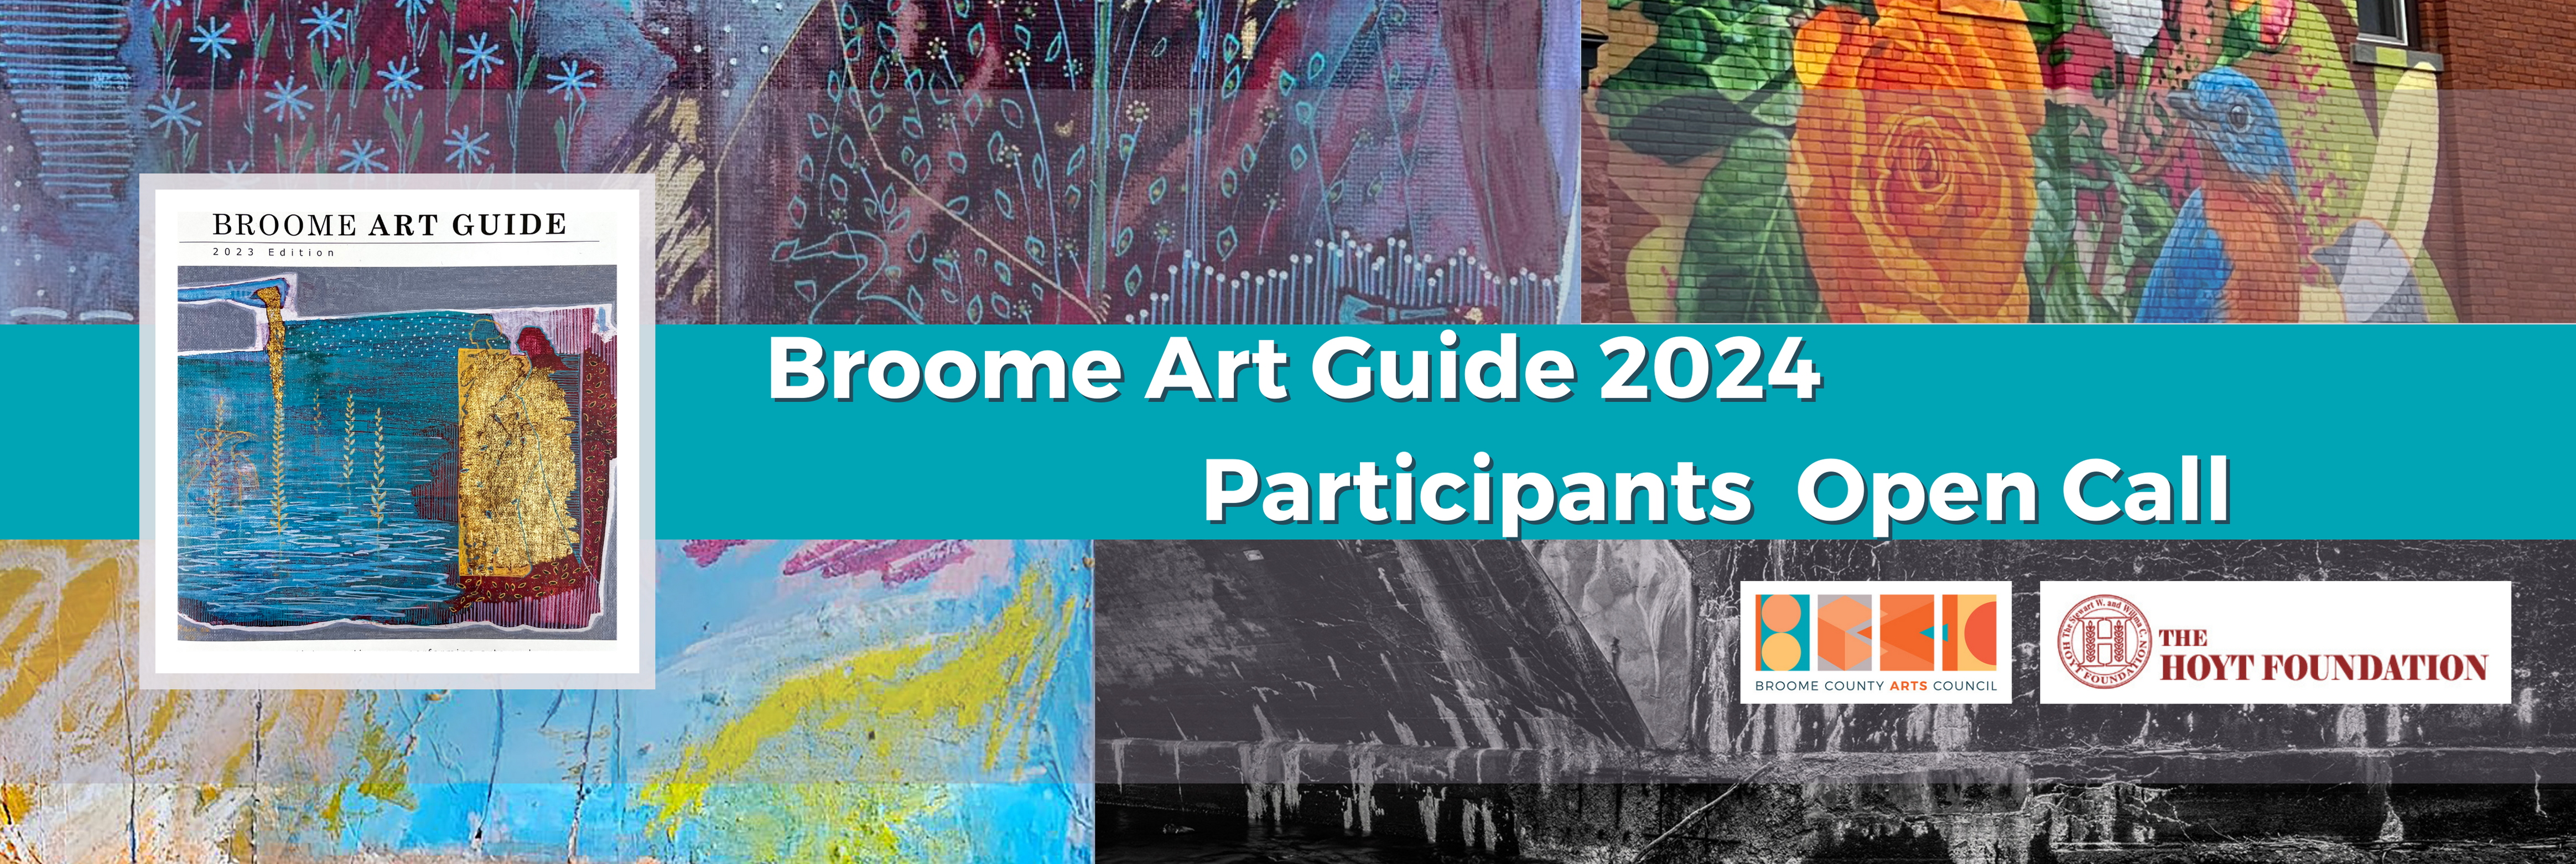 The Broome Art Guide contains local art galleries, businesses, and more